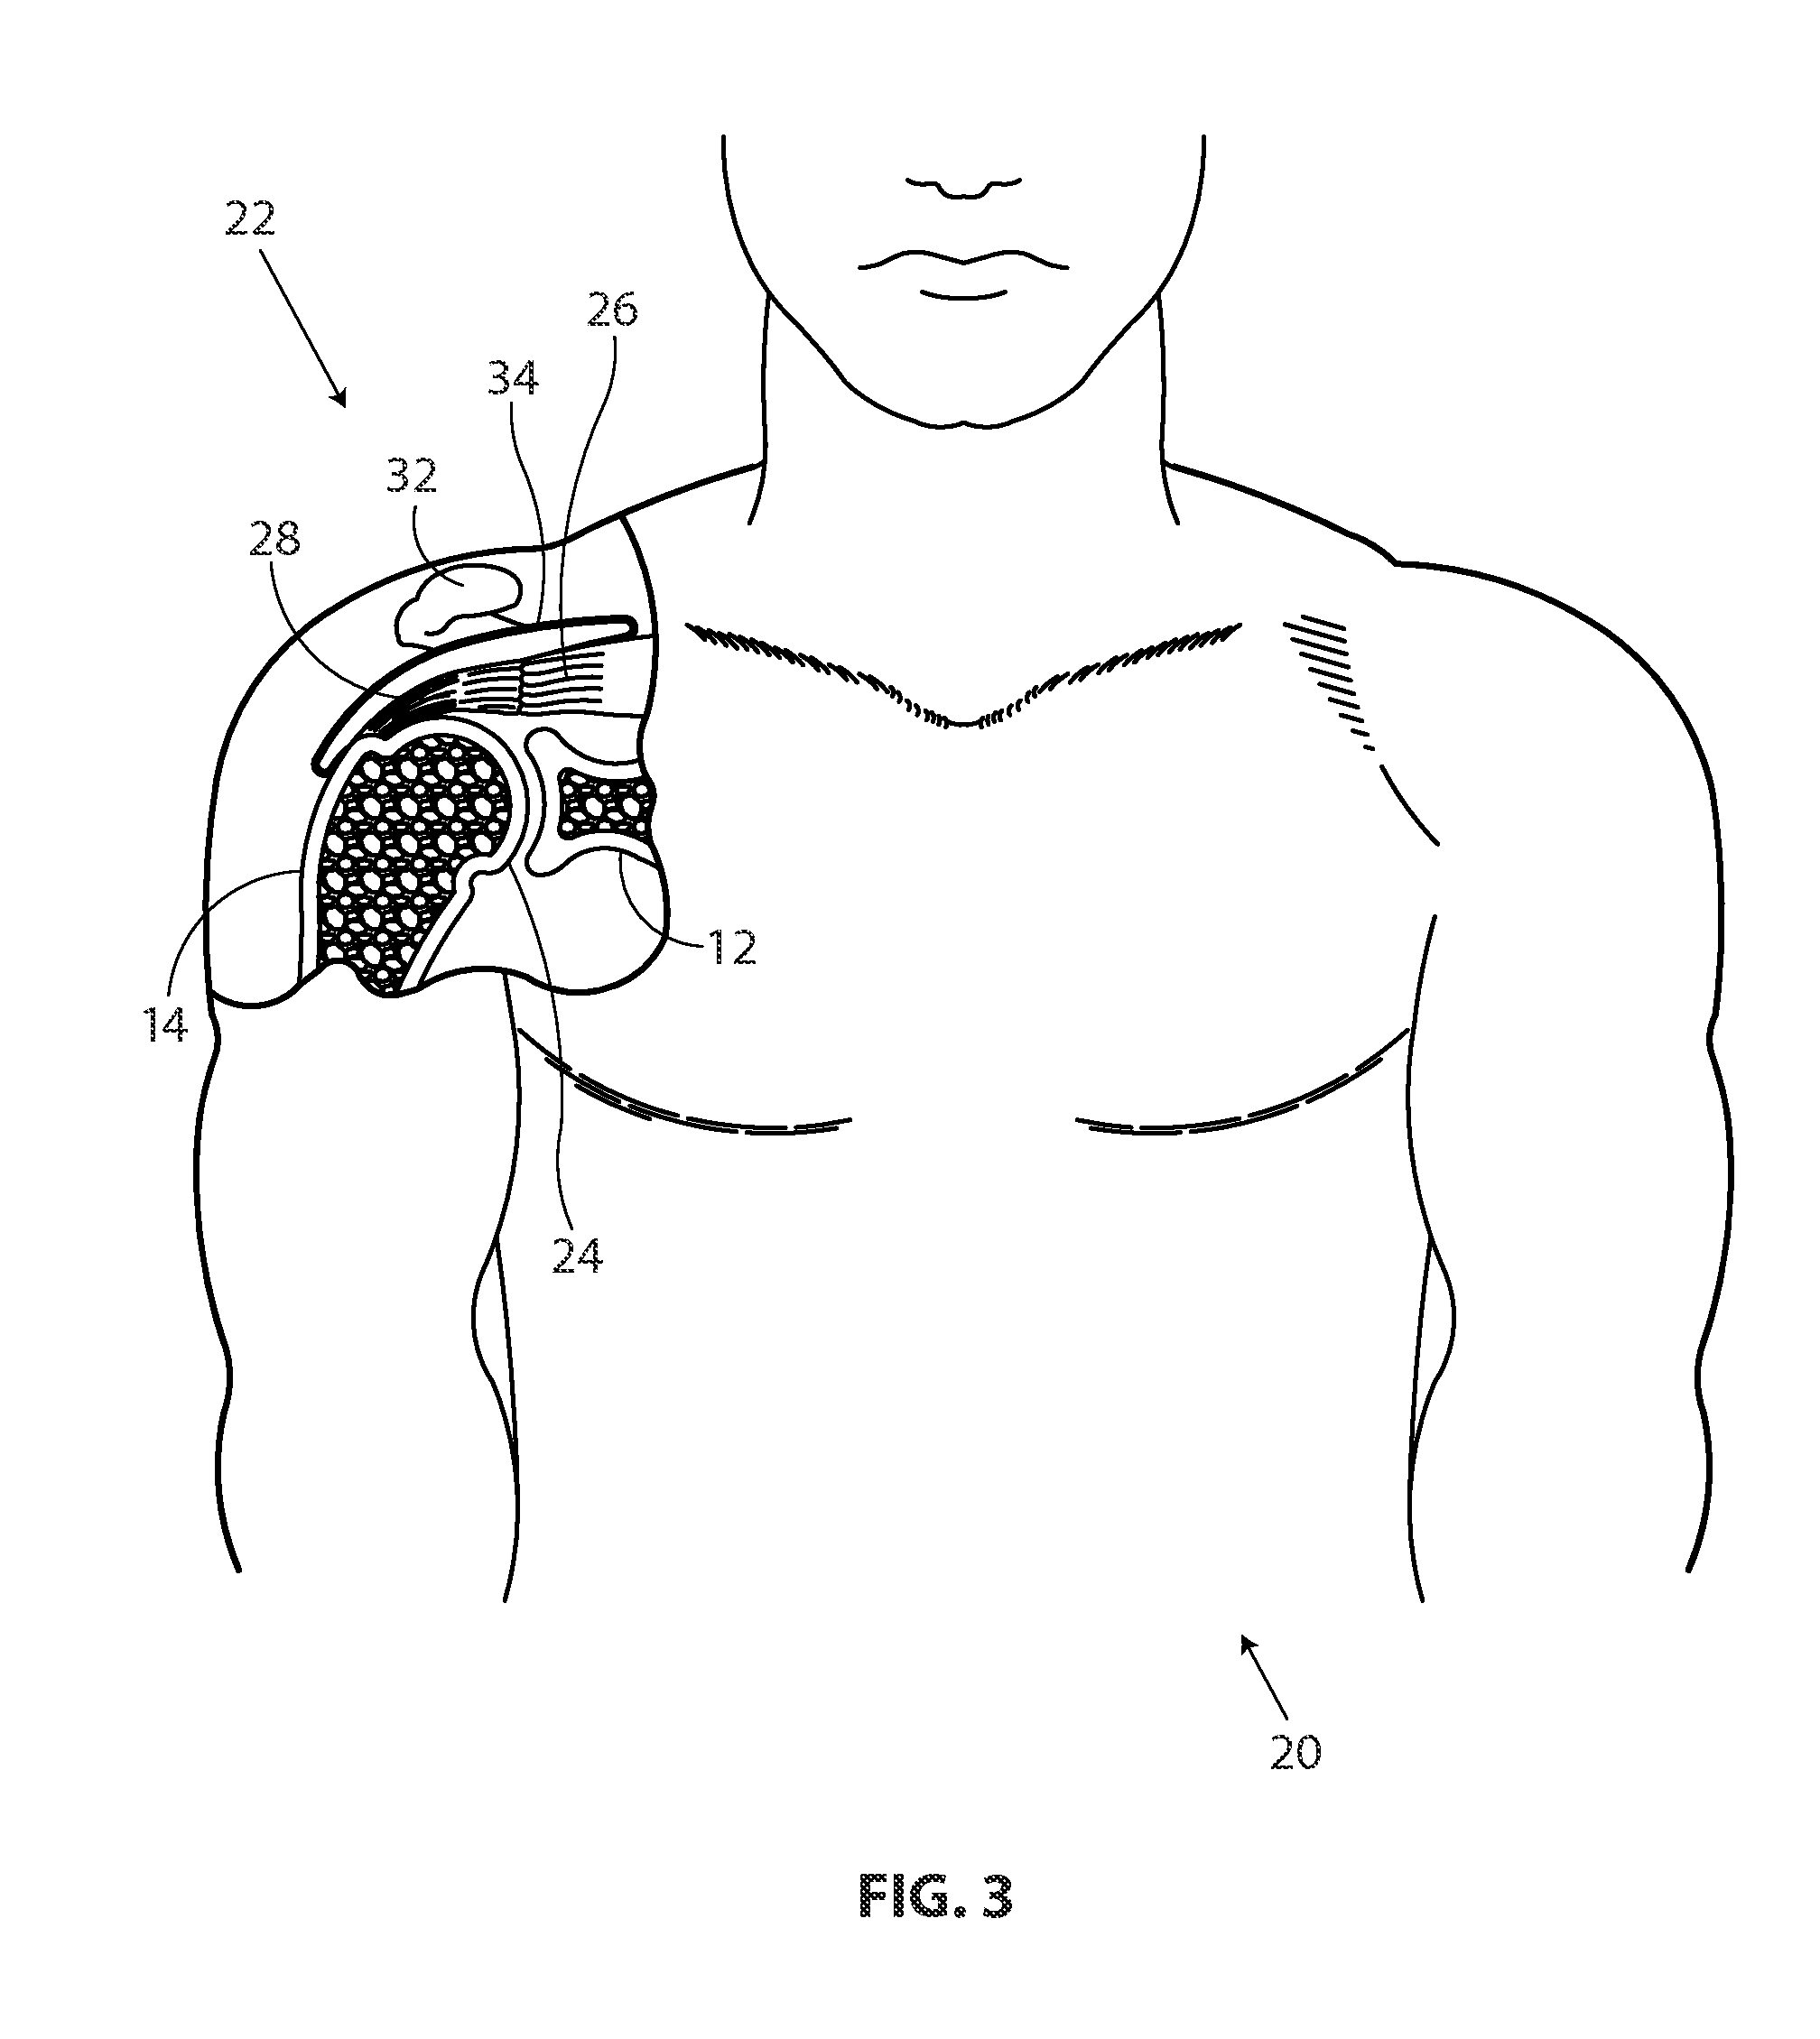 Methods and apparatus for fixing sheet-like materials to a target tissue